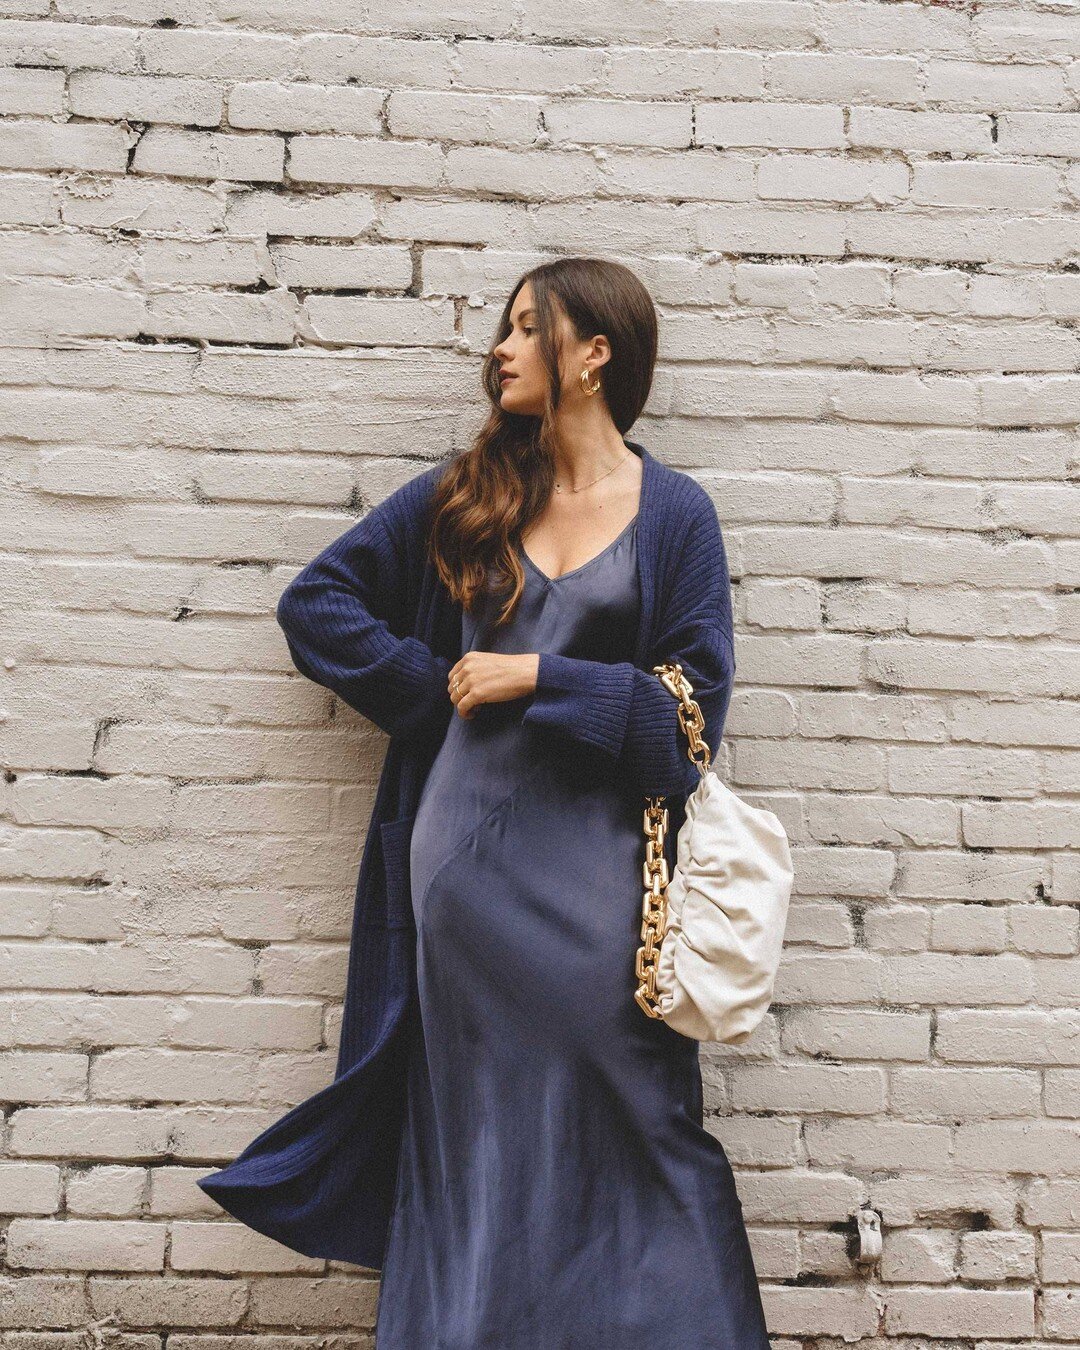 Favorite winter textures: silk and cashmere 💙 I love wearing dresses - so much so that I don&rsquo;t want to give them up just because the temperature drops. A satin dress and long cashmere sweater is one of my favorite ways to wear a dress during w